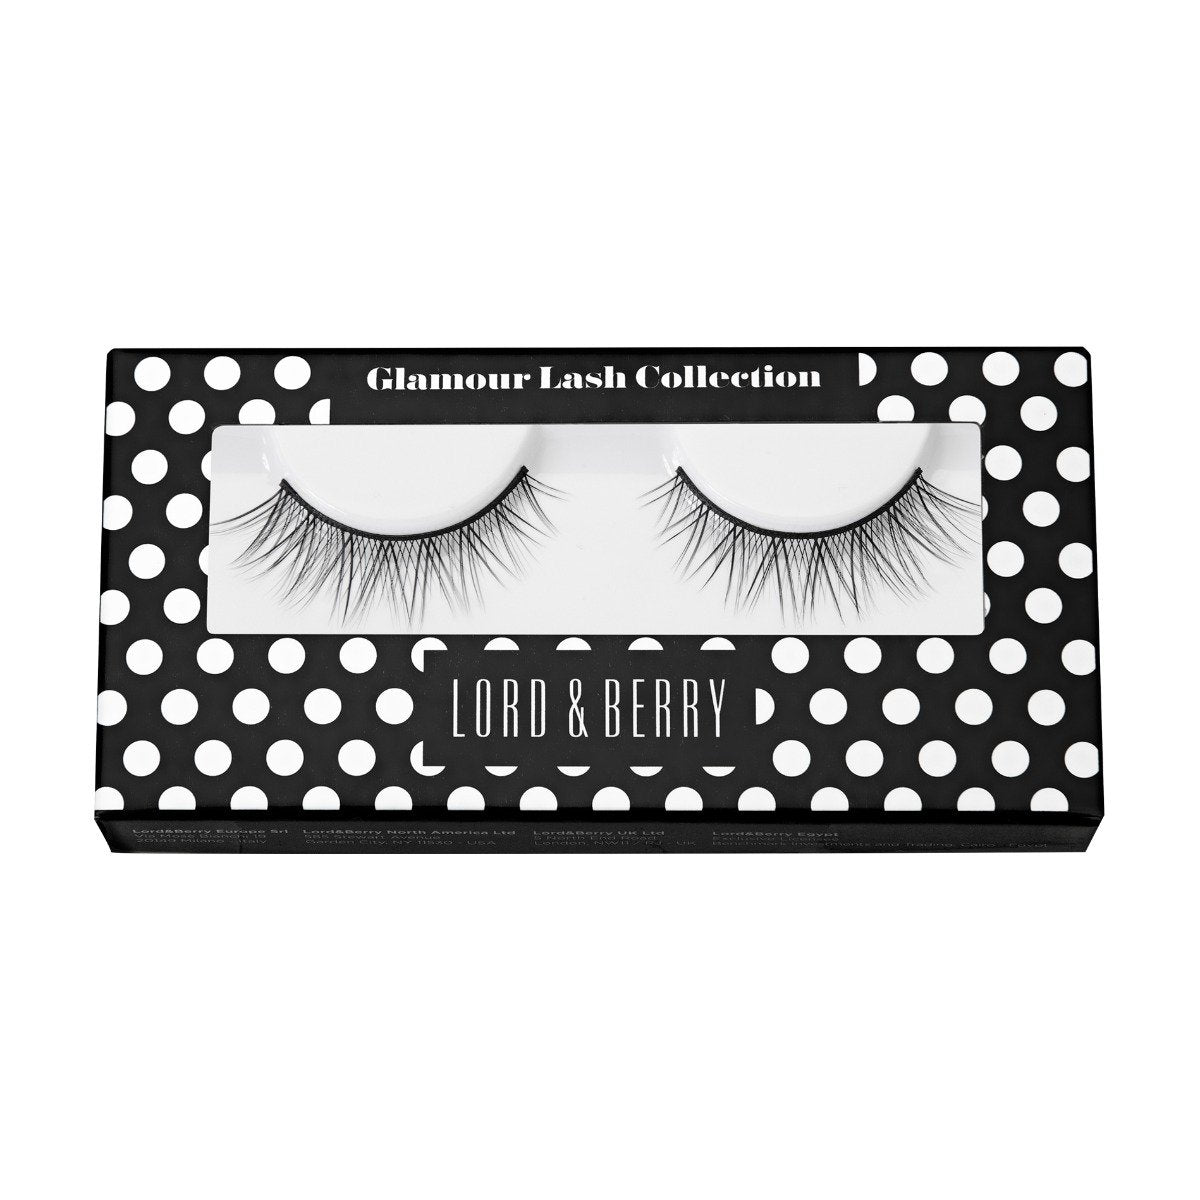 Lord & Berry Eyelashes Glamour Lash Collection - EL17 - Bloom Pharmacy